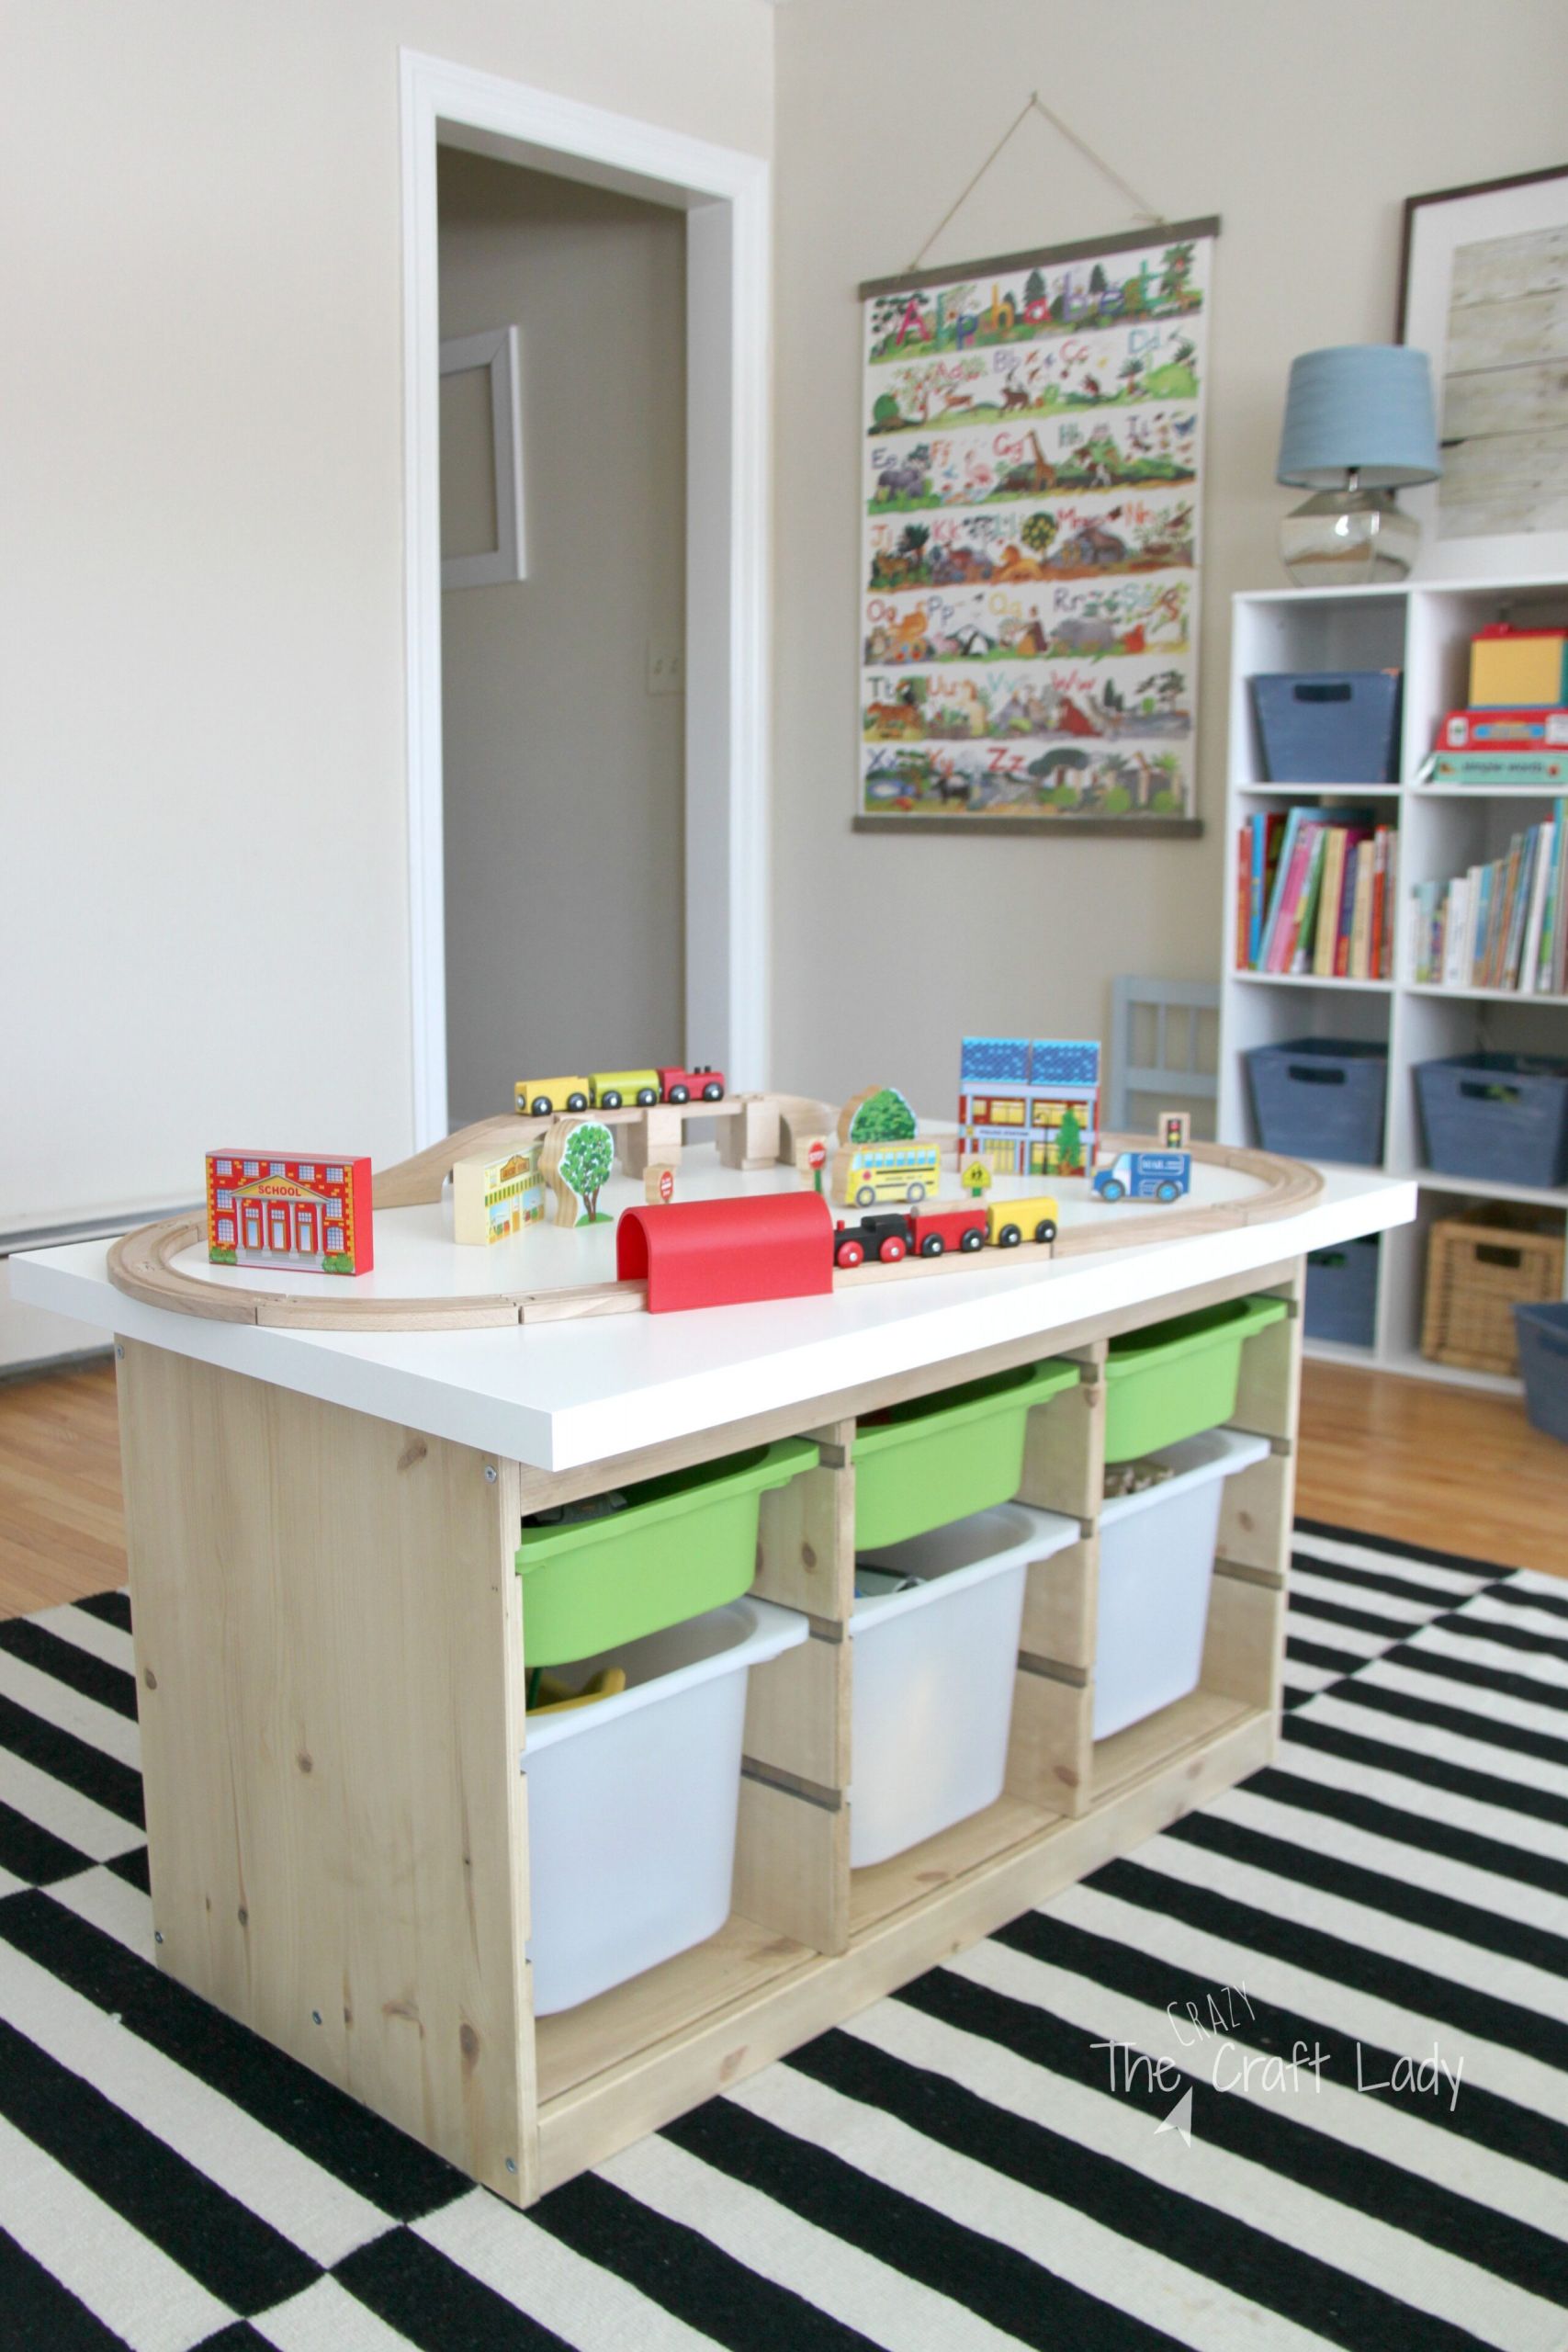 Ikea Kids Toy Storage
 An Ikea Hack Train & Activity Table The Crazy Craft Lady